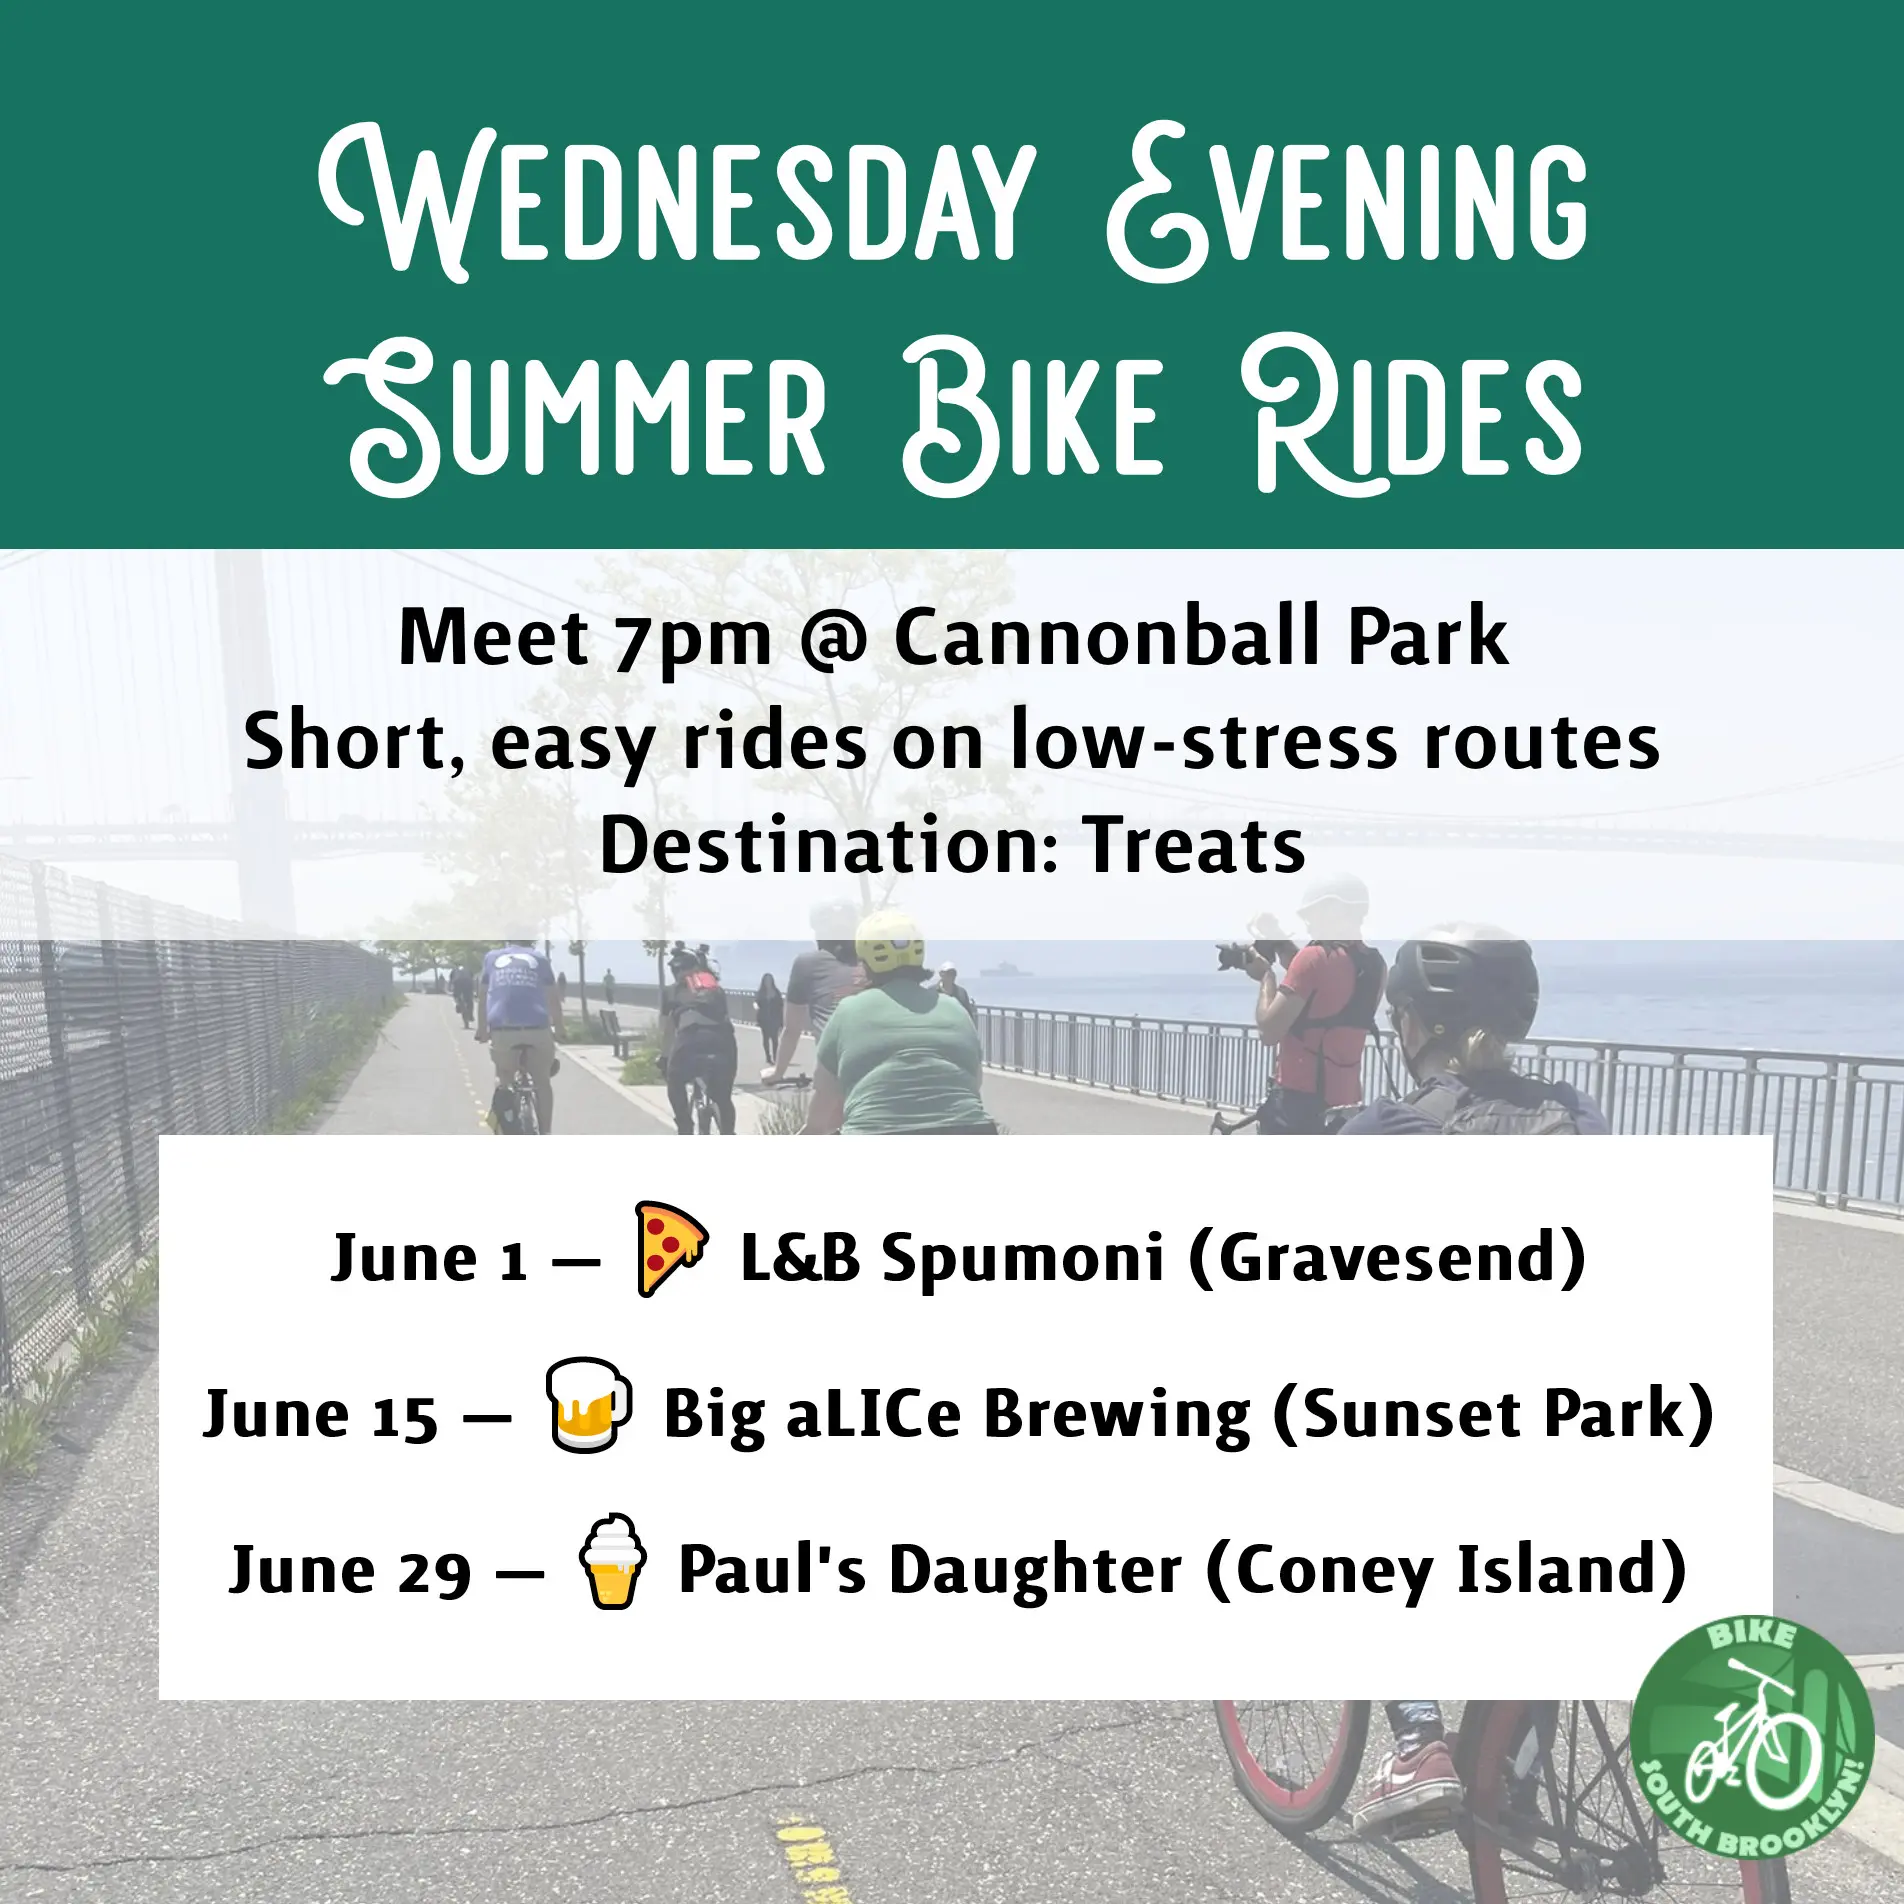 Event graphic for Bike South Brooklyn's Wednesday Evening Summer Bike Rides